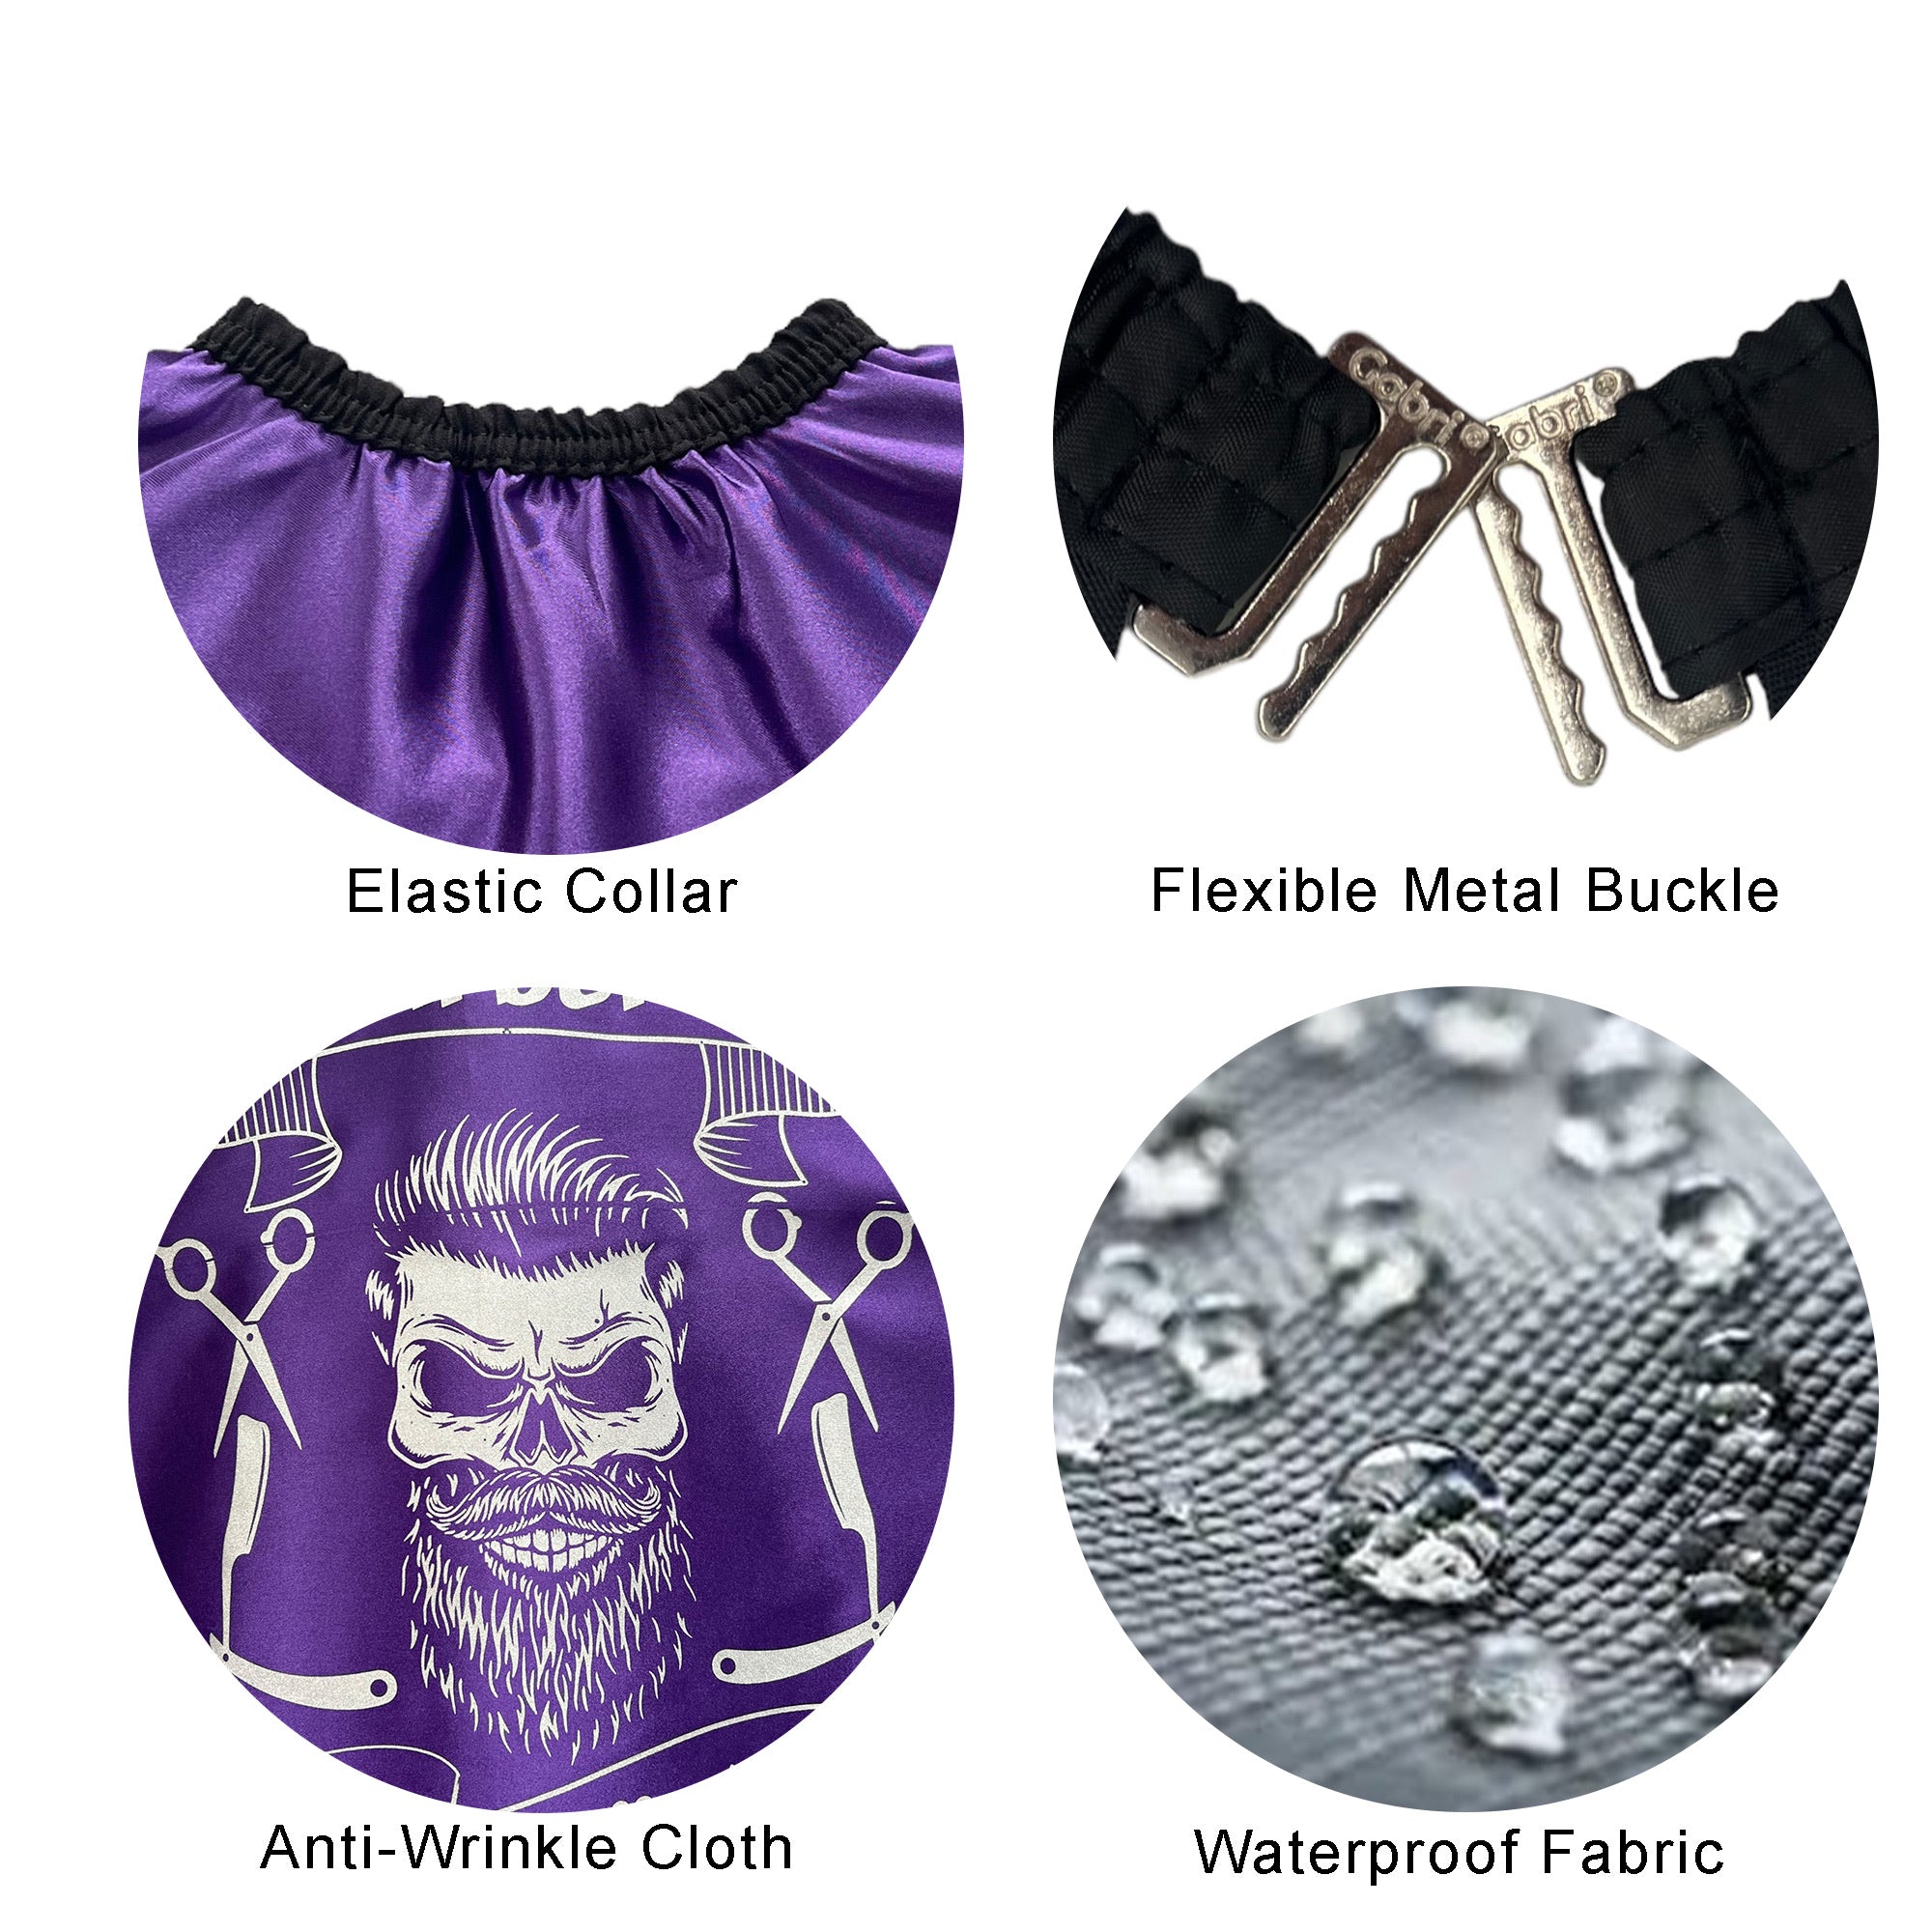 Gabri - Barber Hairdressing Hair Cutting Capes & Gowns Skull Pattern (Purple)